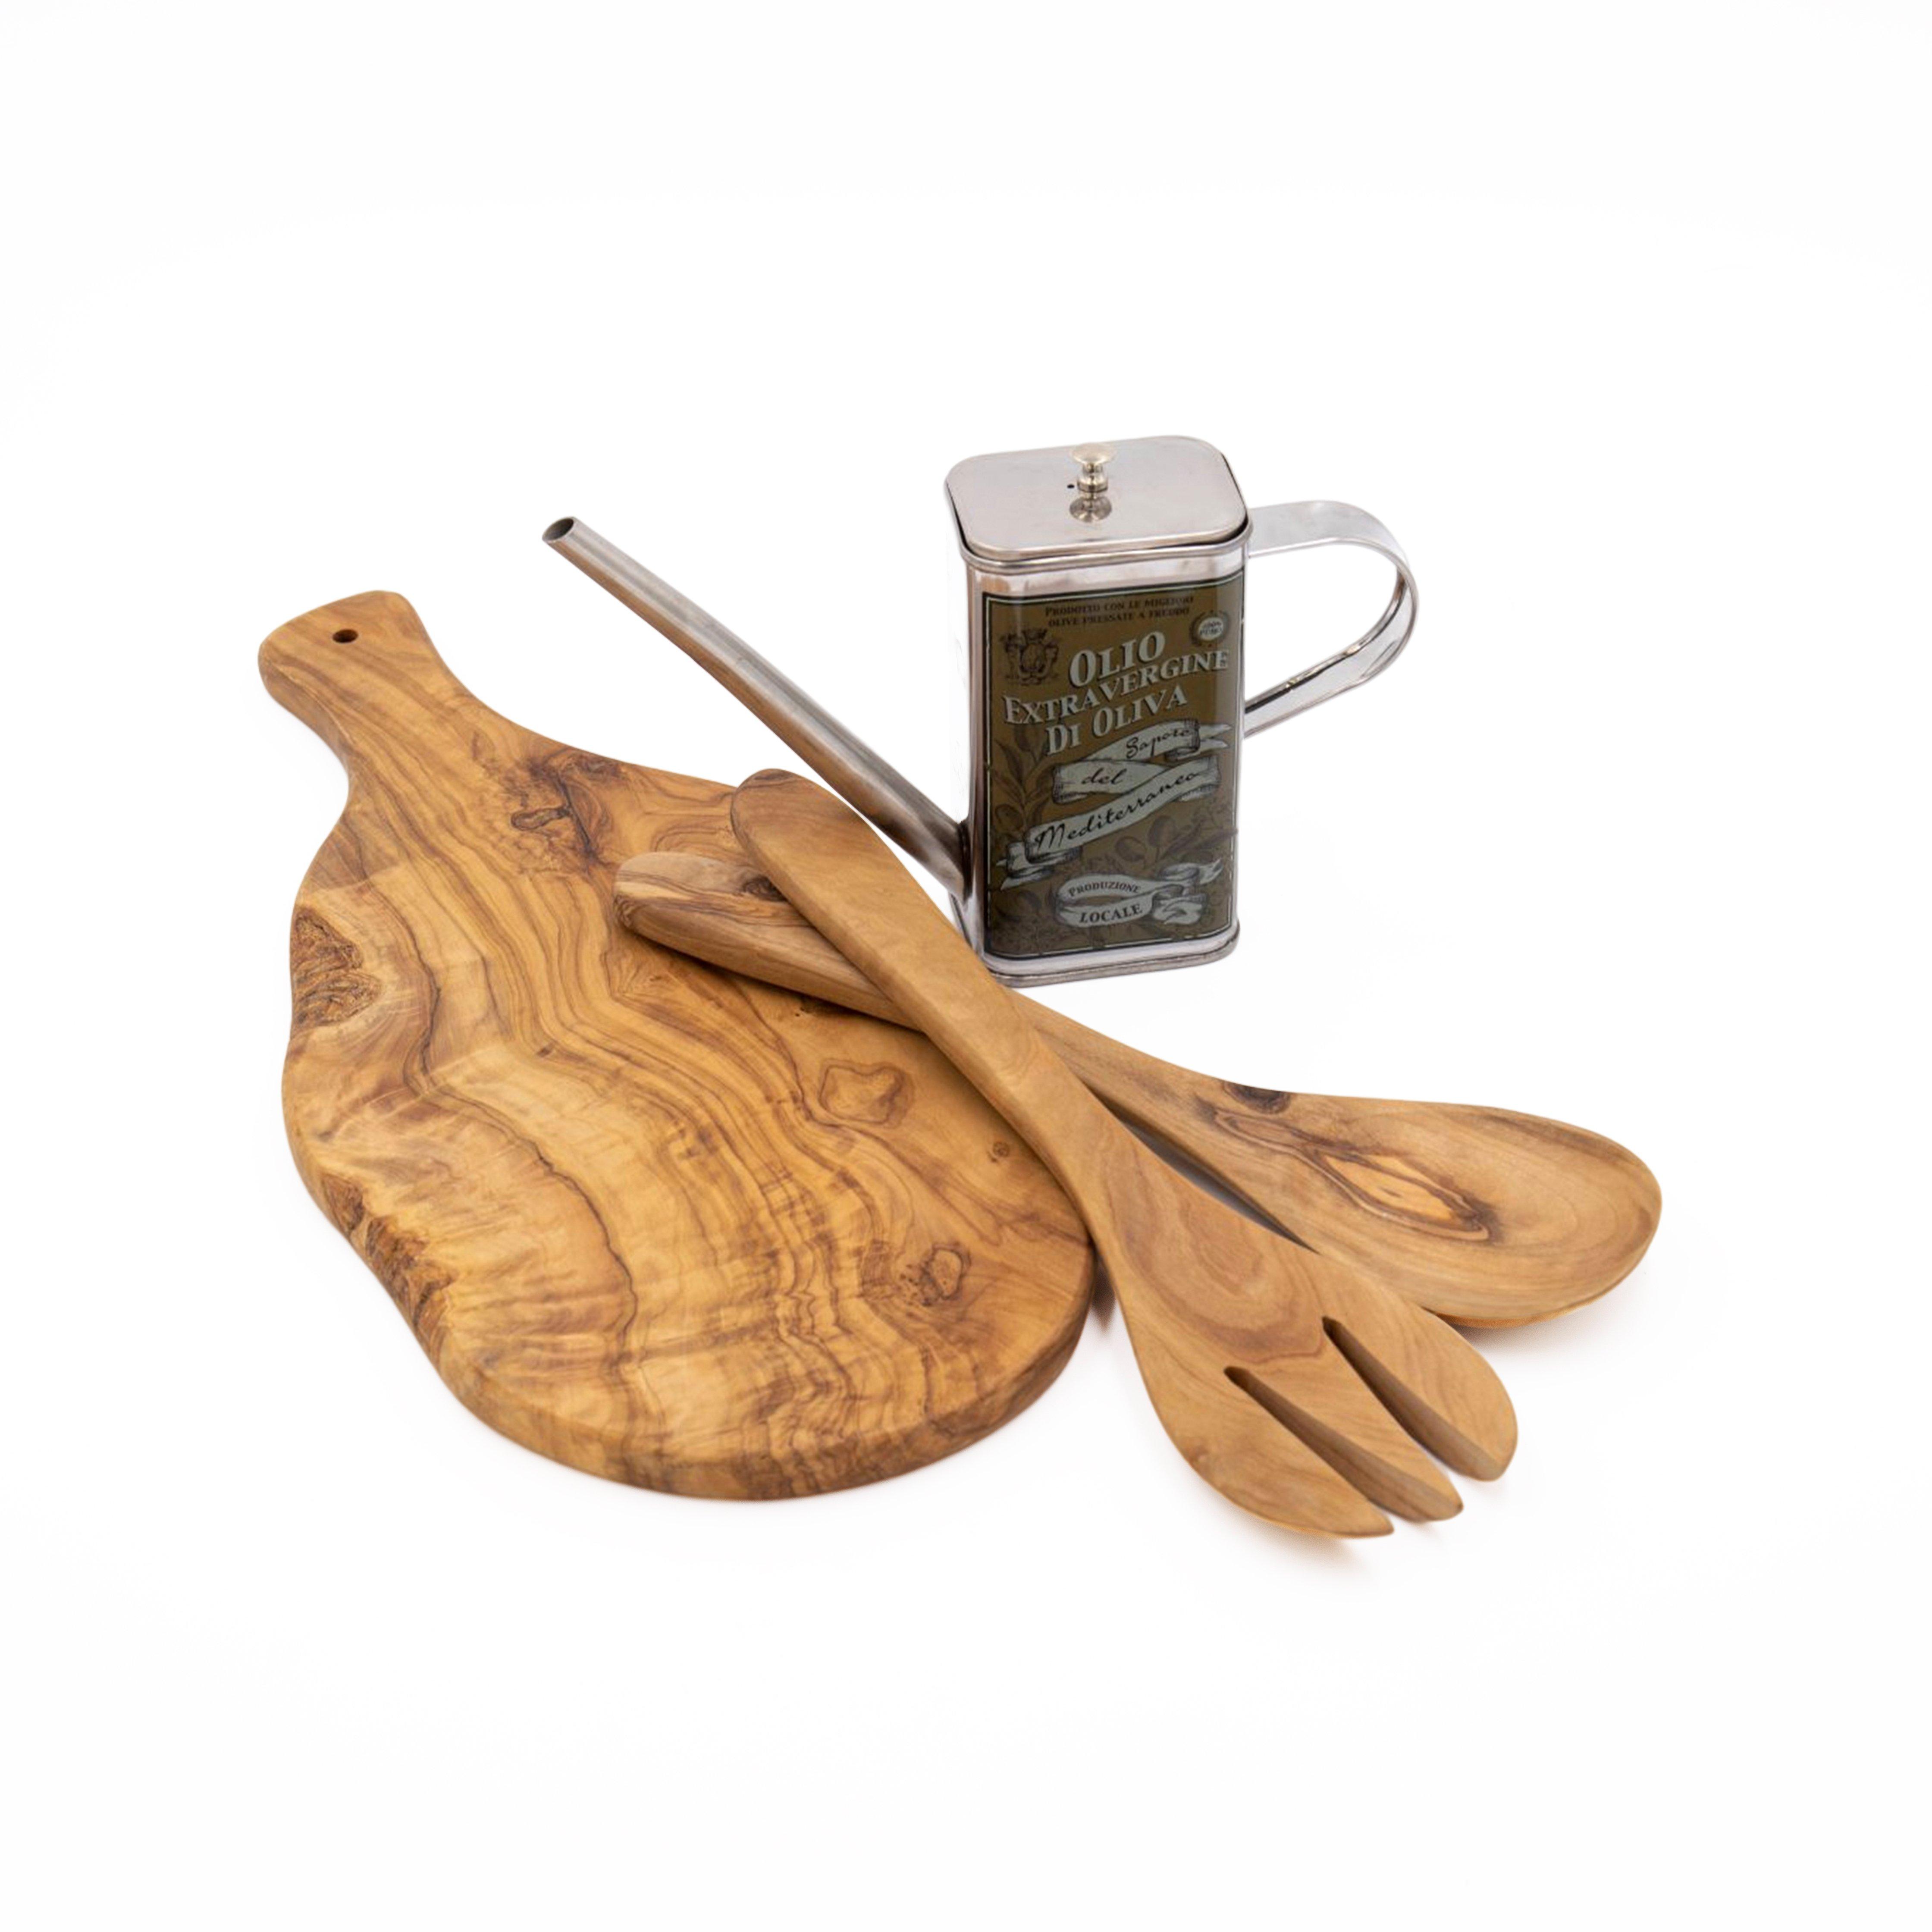 3pc Italian Cooking Set with Olive Wood Salad Servers, Serving Board and Oil Can